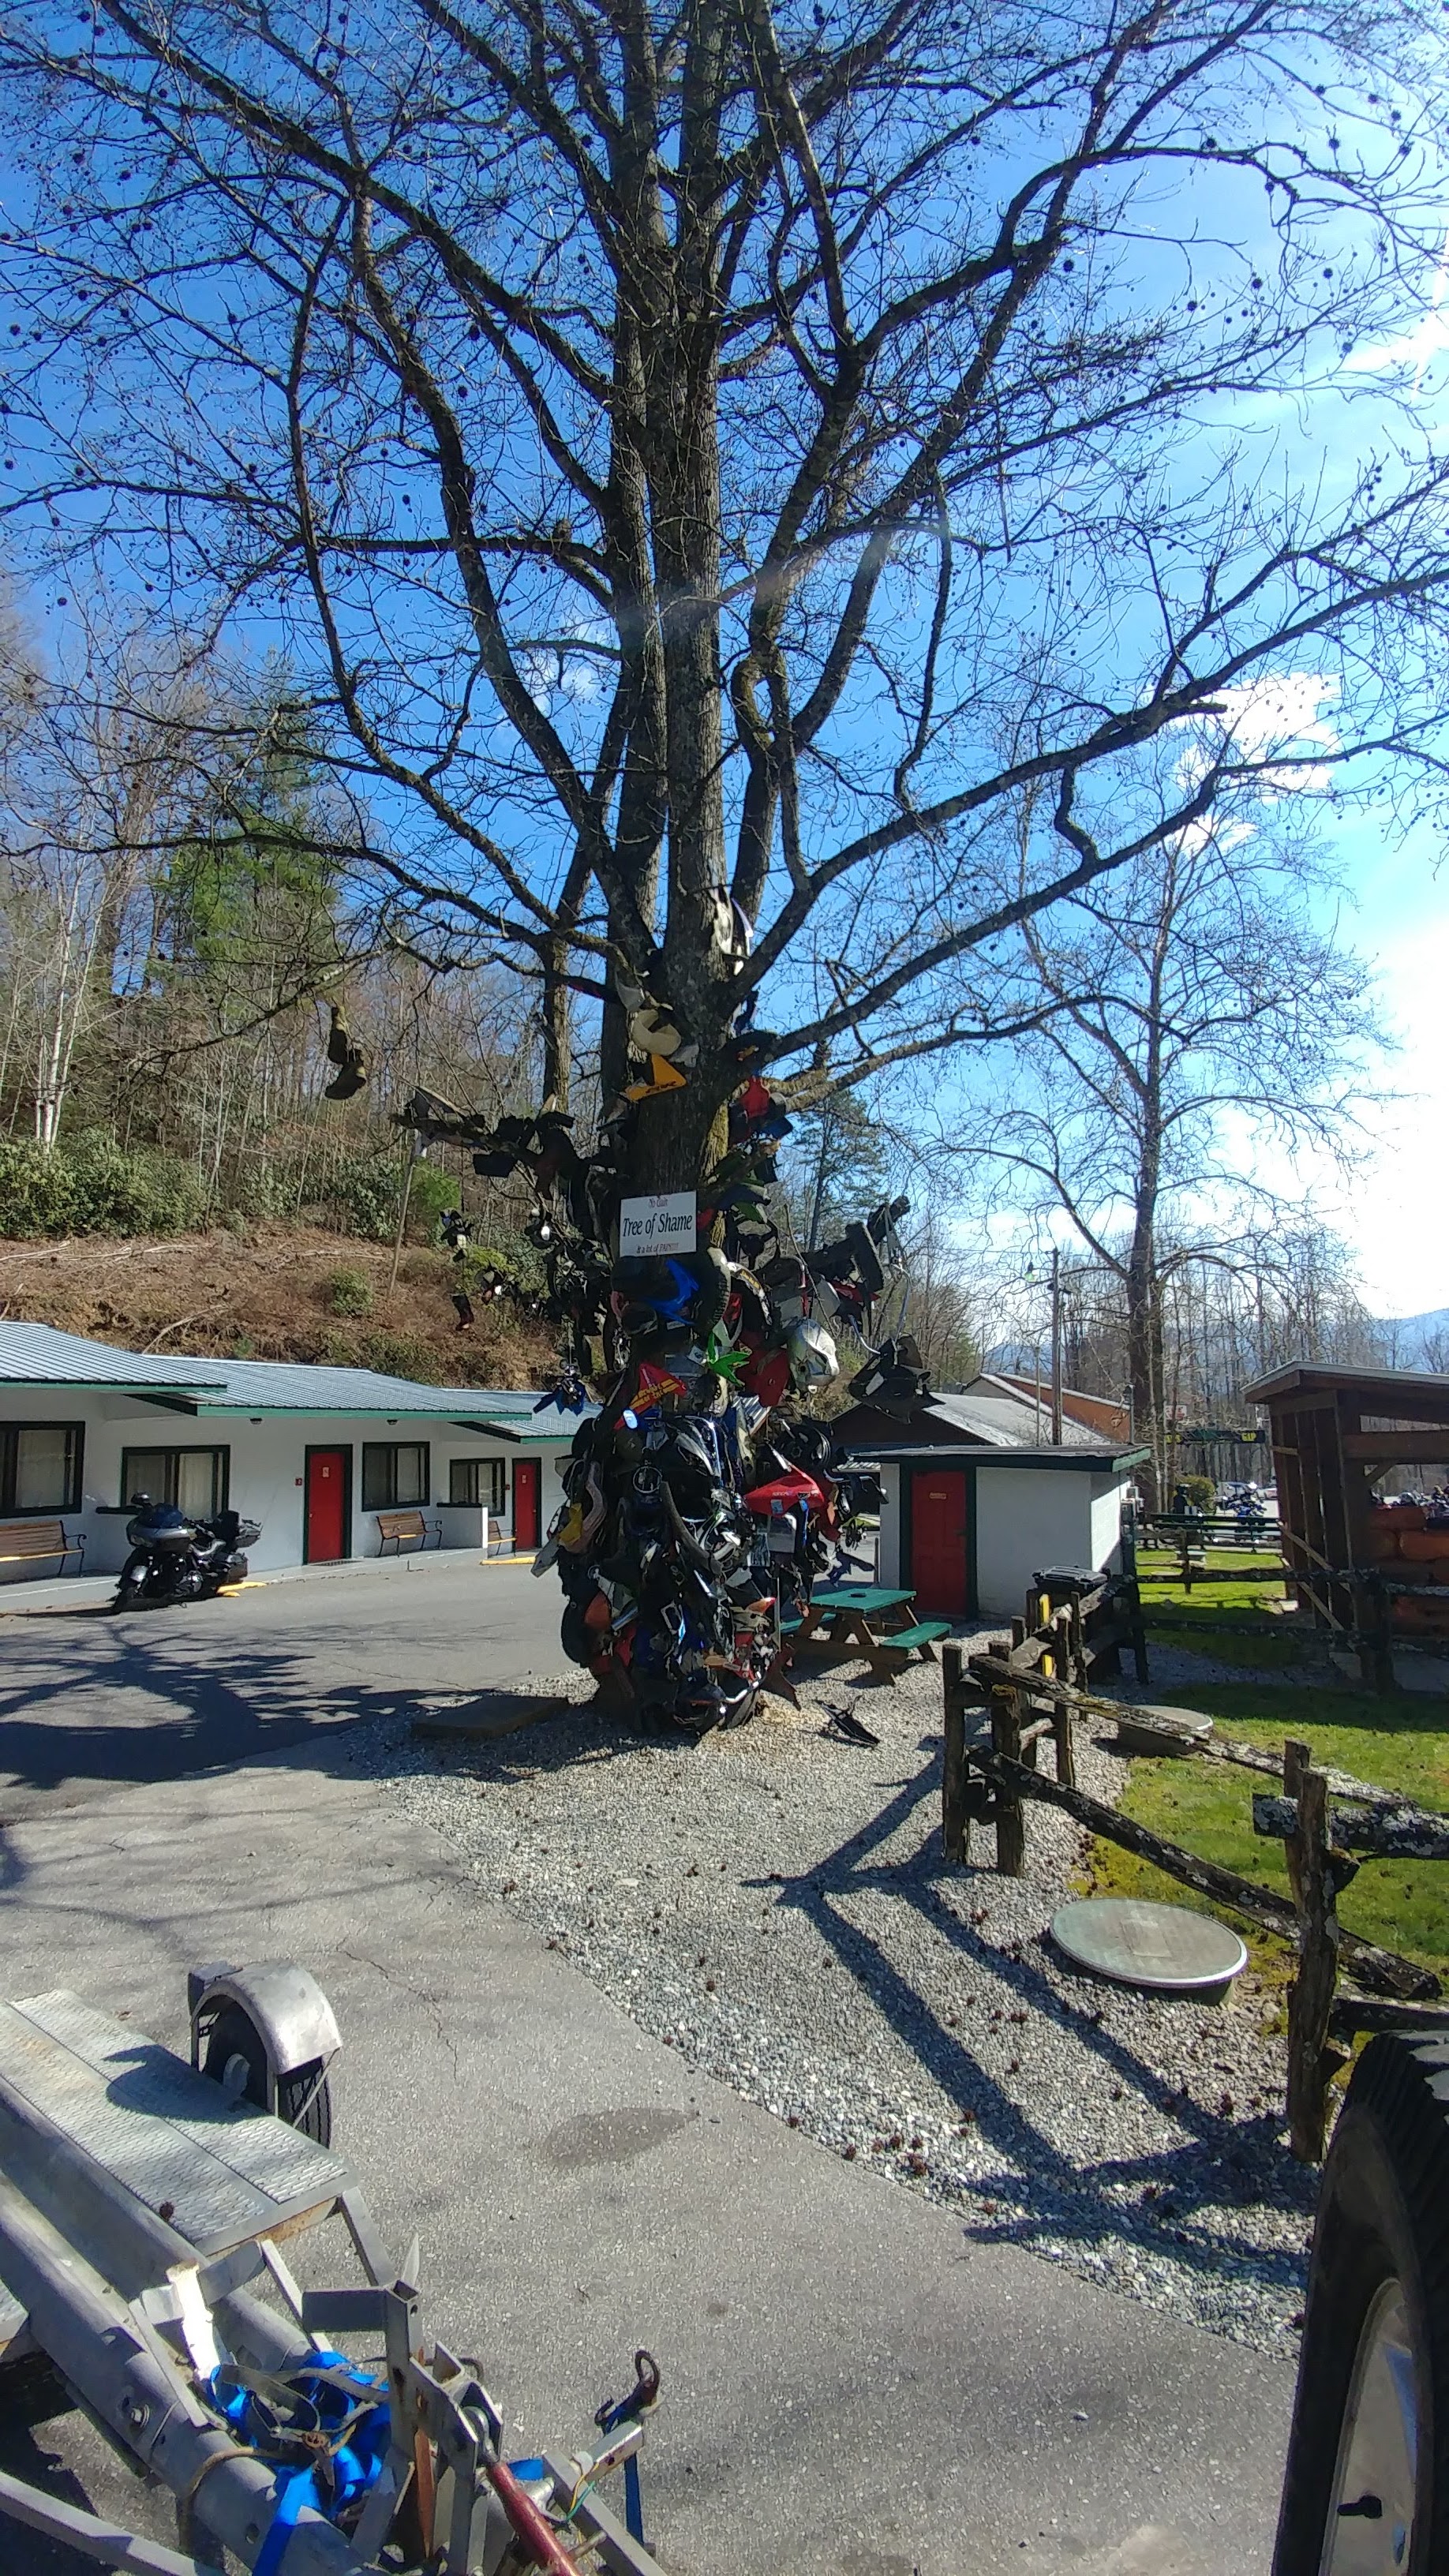 Picture of a place: Deals Gap Motorcycle Resort